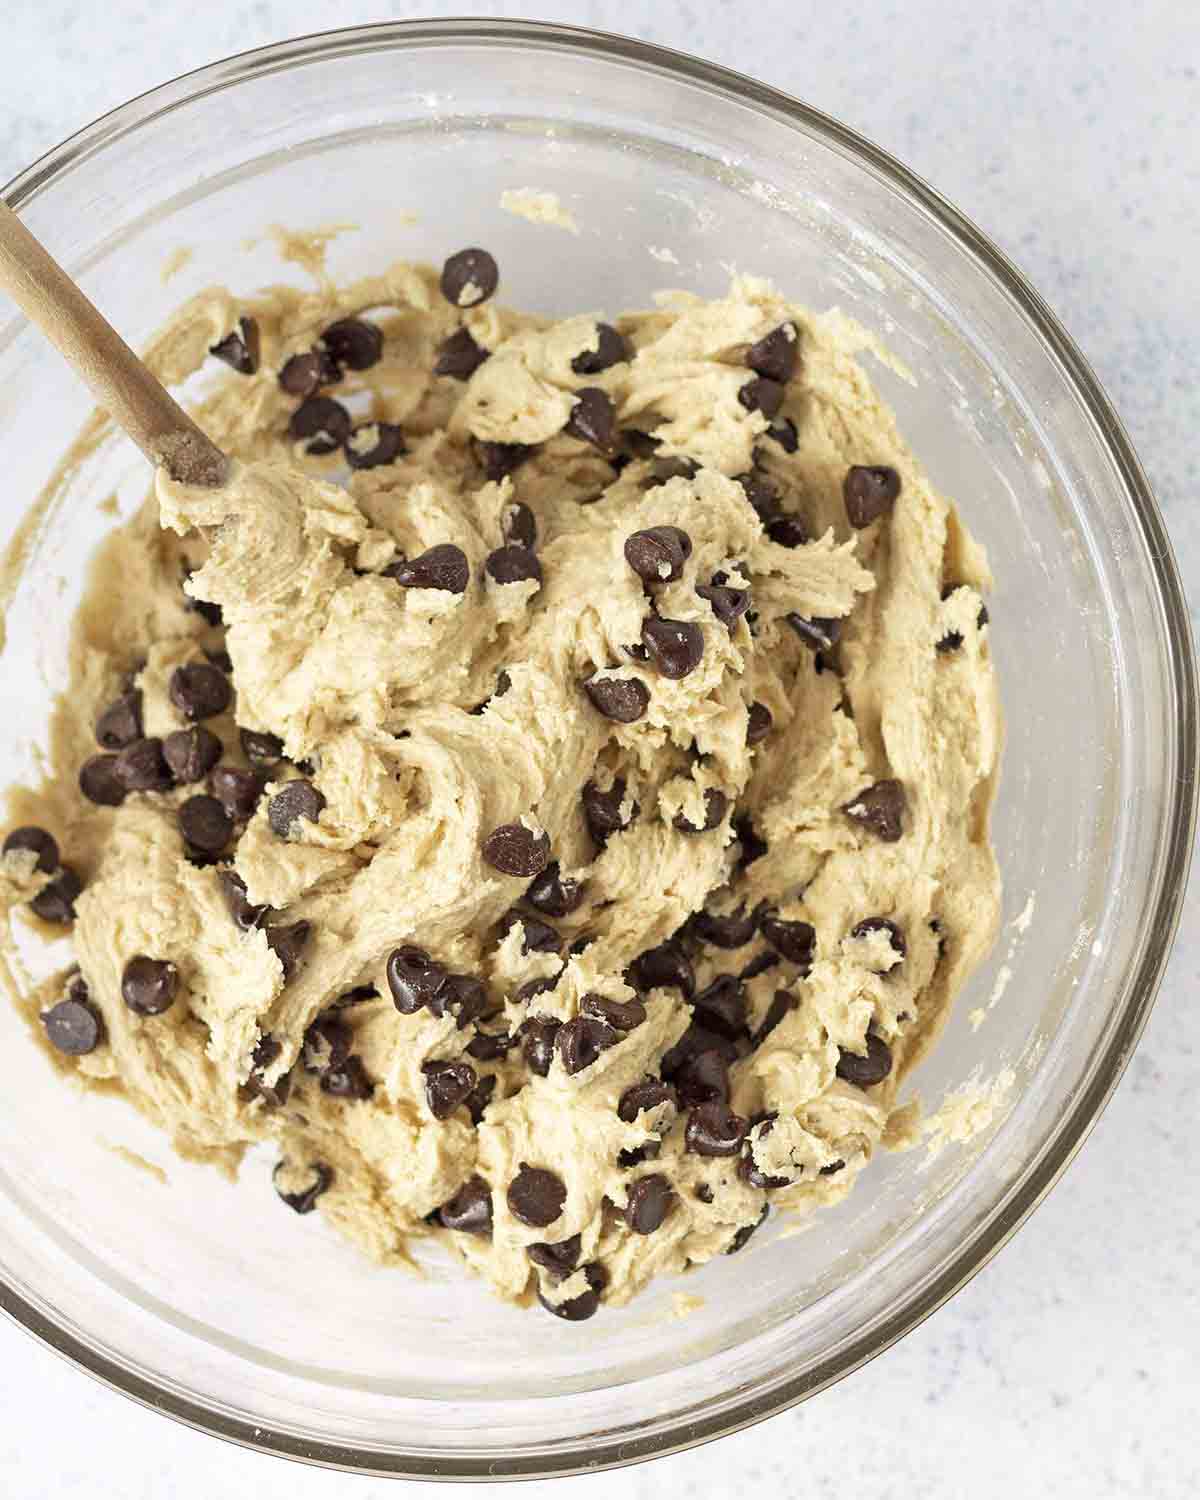 An overhead shot showing a bowl of eggless chocolate chip cookie dough.